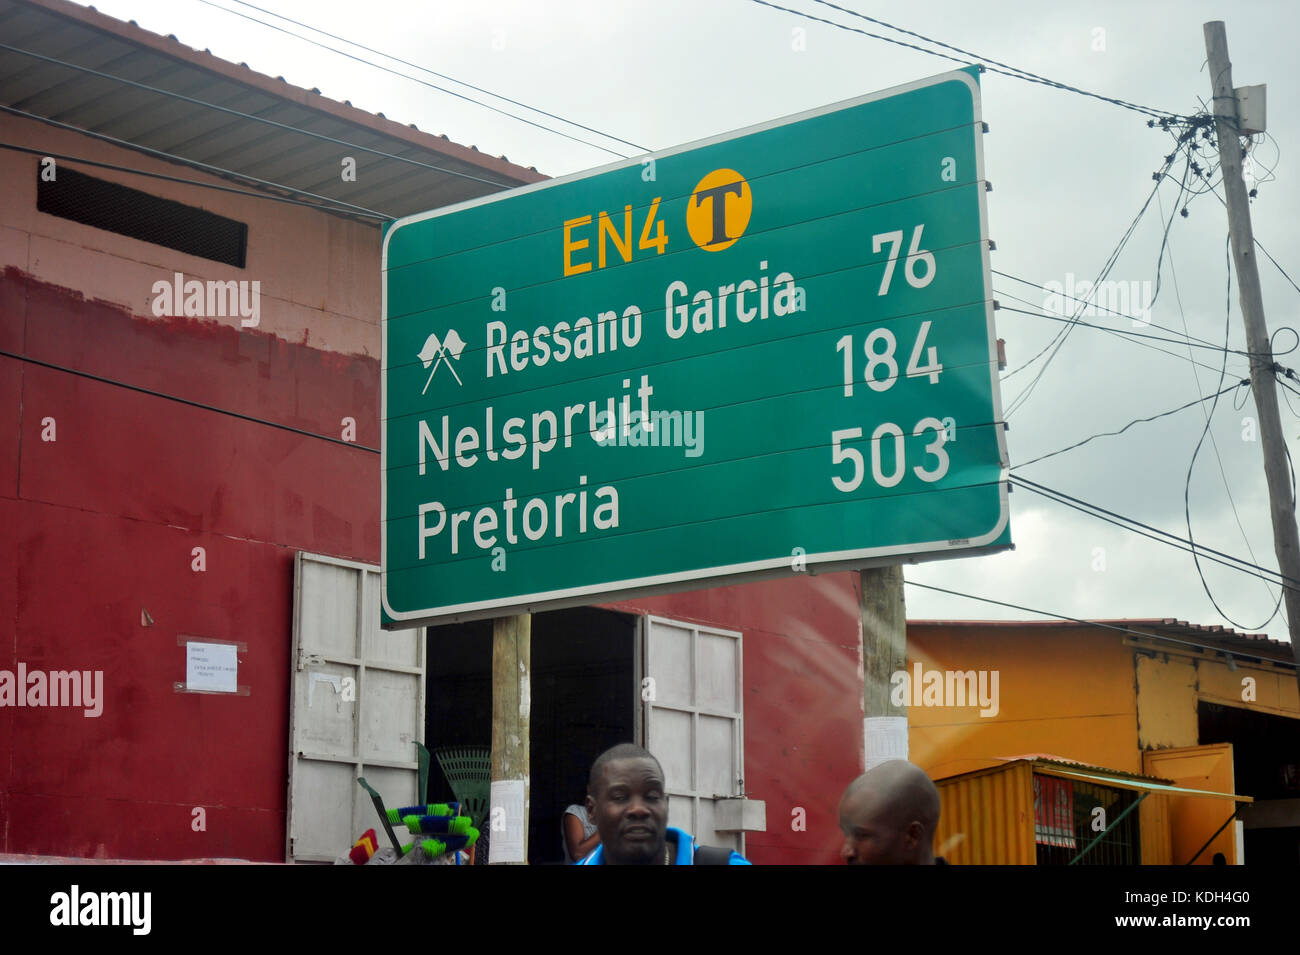 A Mozambique road sign showing direction to Pretoria. Stock Photo